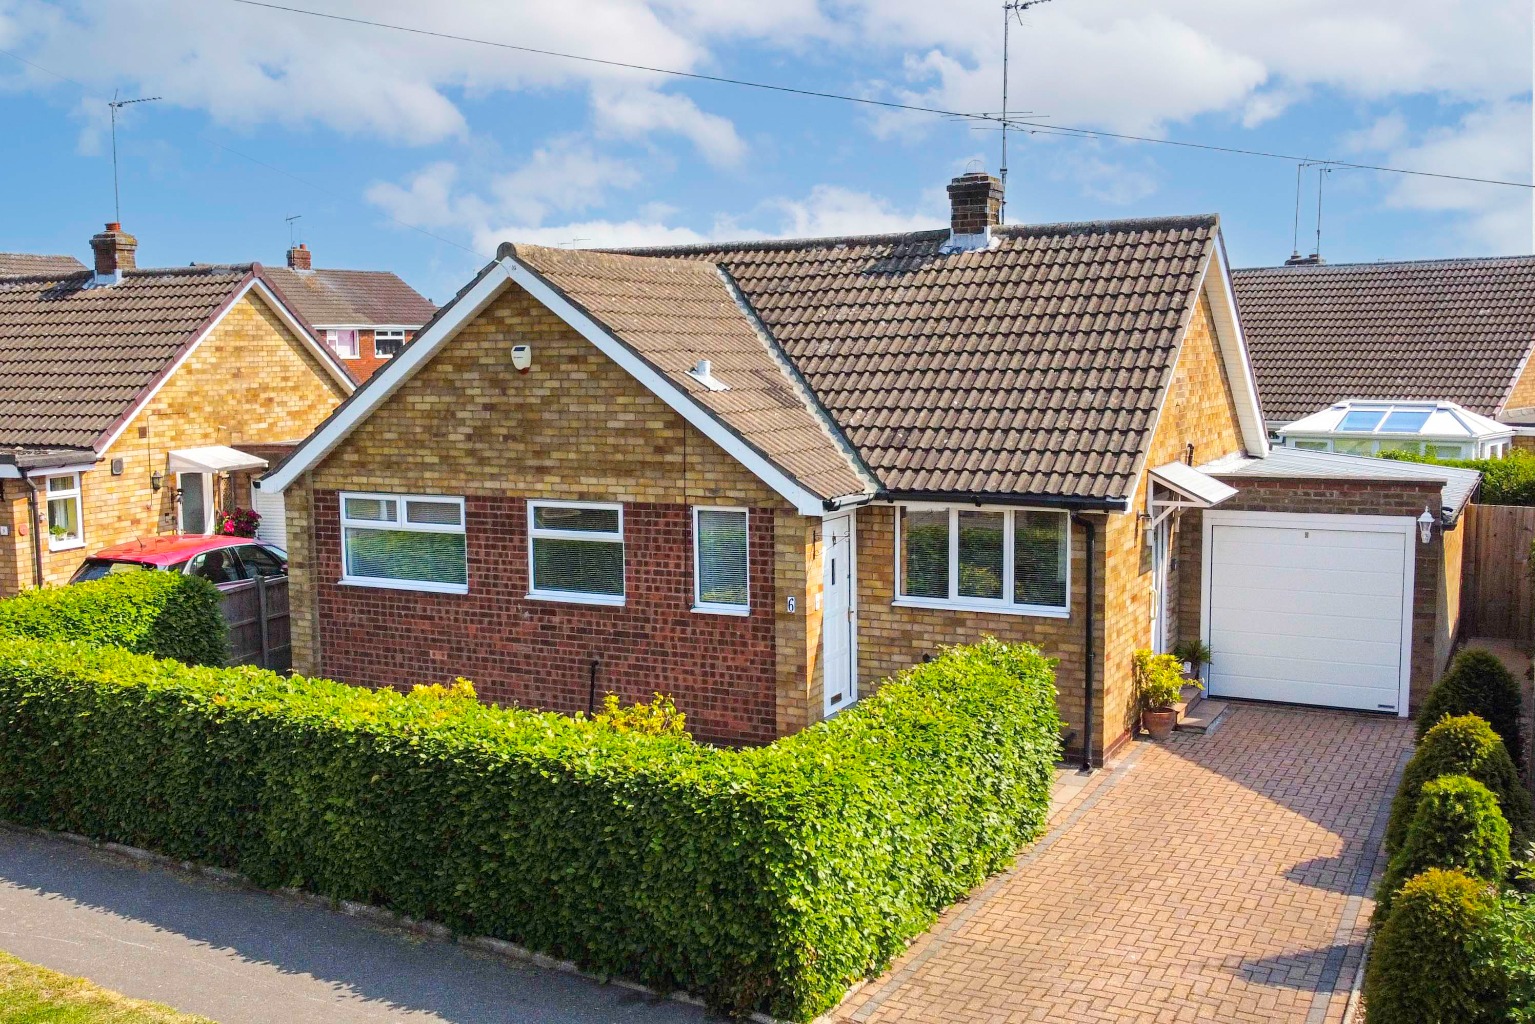 3 bed bungalow for sale in Molescroft Avenue, Beverley - Property Image 1